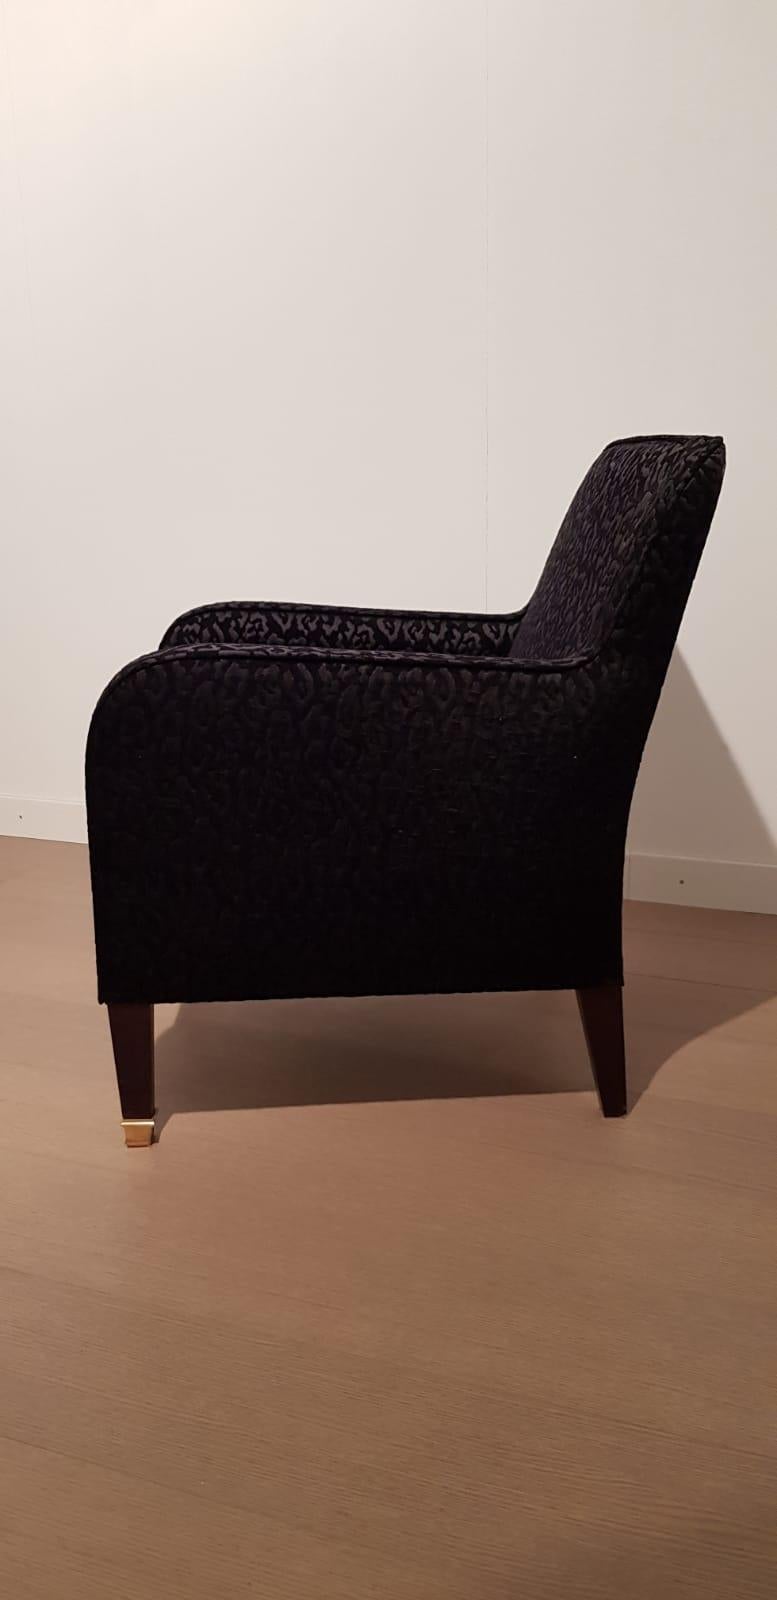 Hand-Crafted armchair contemporary classic armchair Design by Anna Gili Milan Made in Italy For Sale